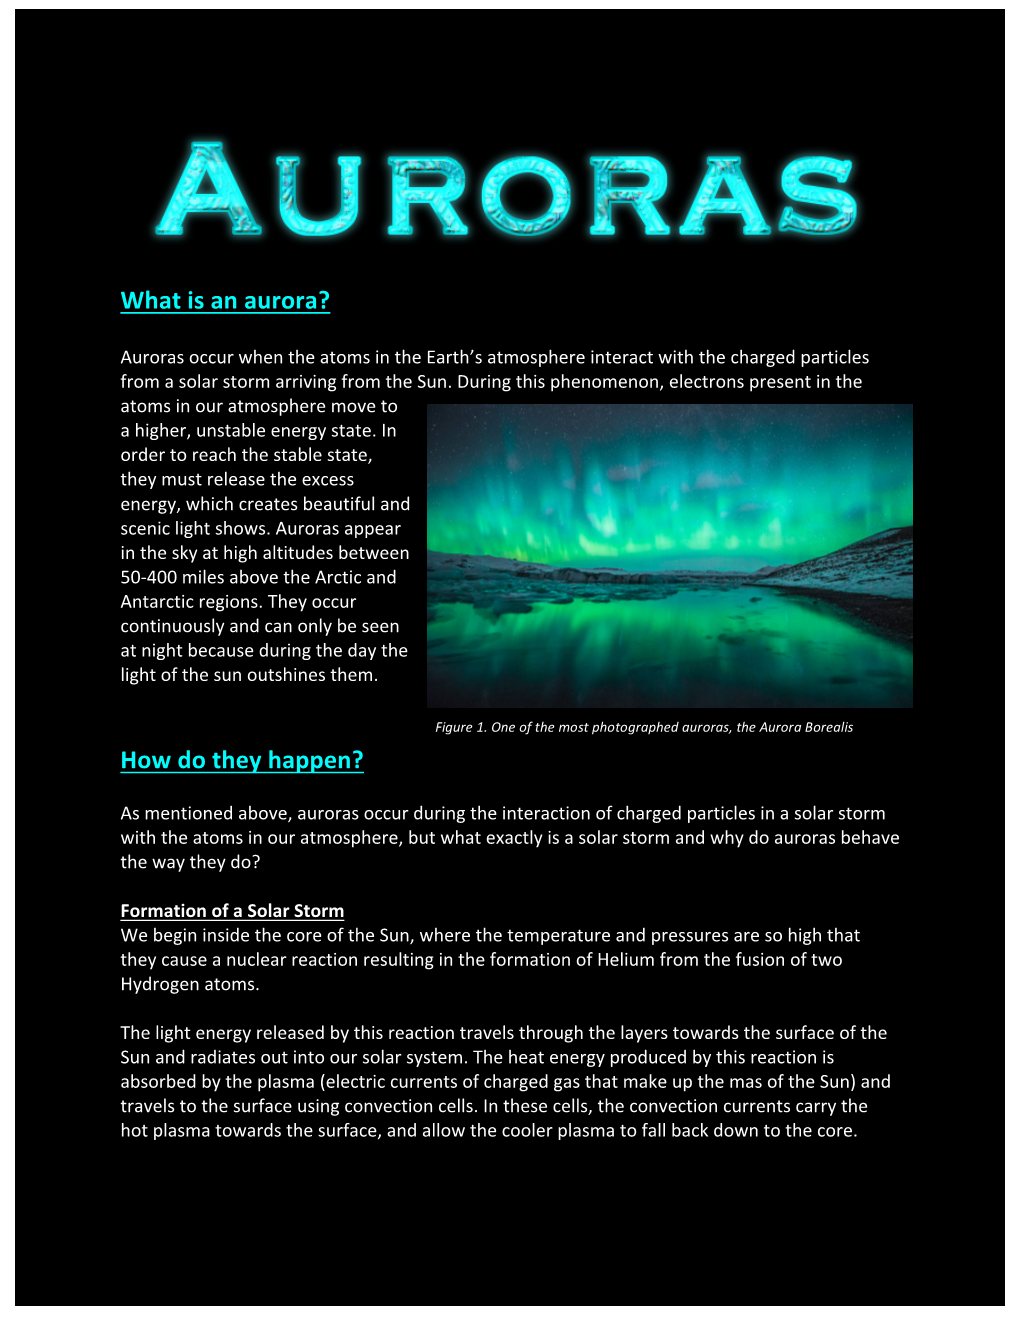 What Is an Aurora? How Do They Happen?